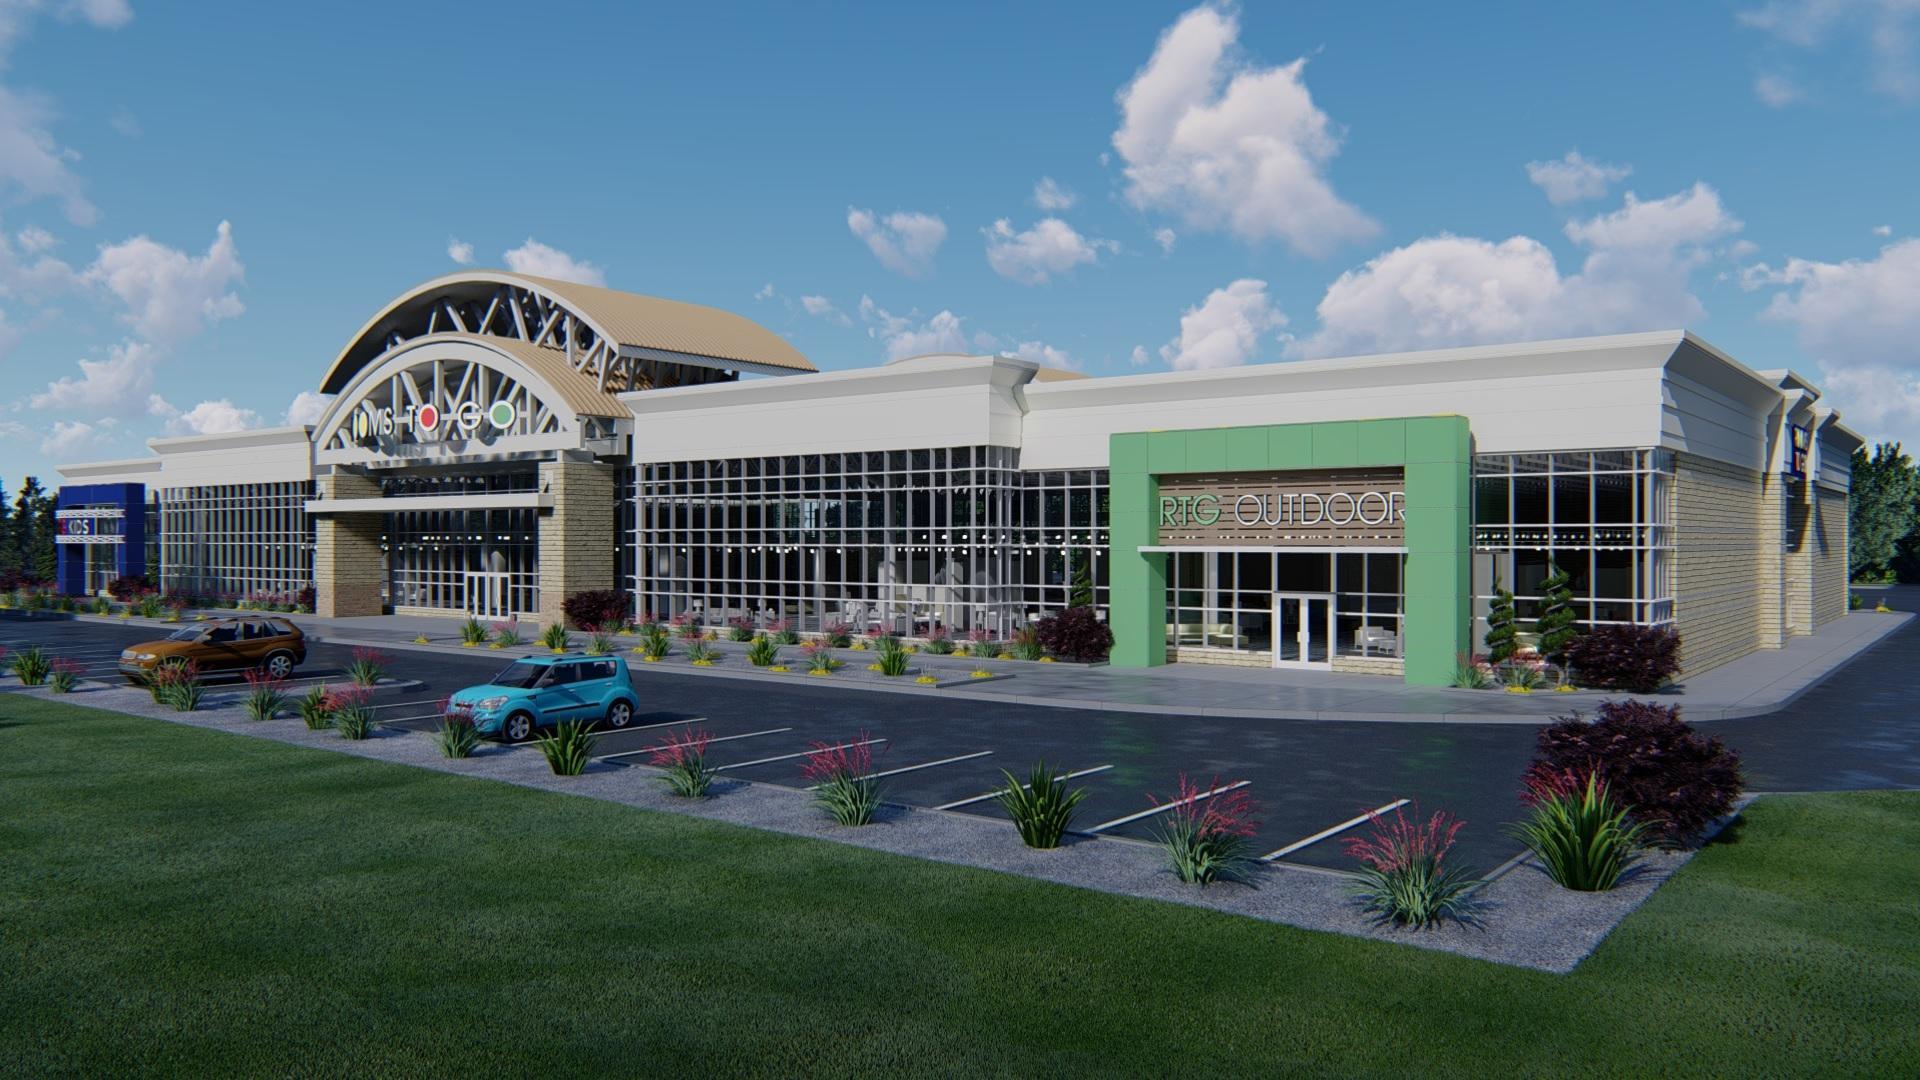 A rendering of a 55,400-square-foot Rooms To Go prototype store planned for Tomoka Town Center in Daytona Beach. According to a news-journalonline.com in Sept. 2019, the store is expected to open in 2021.